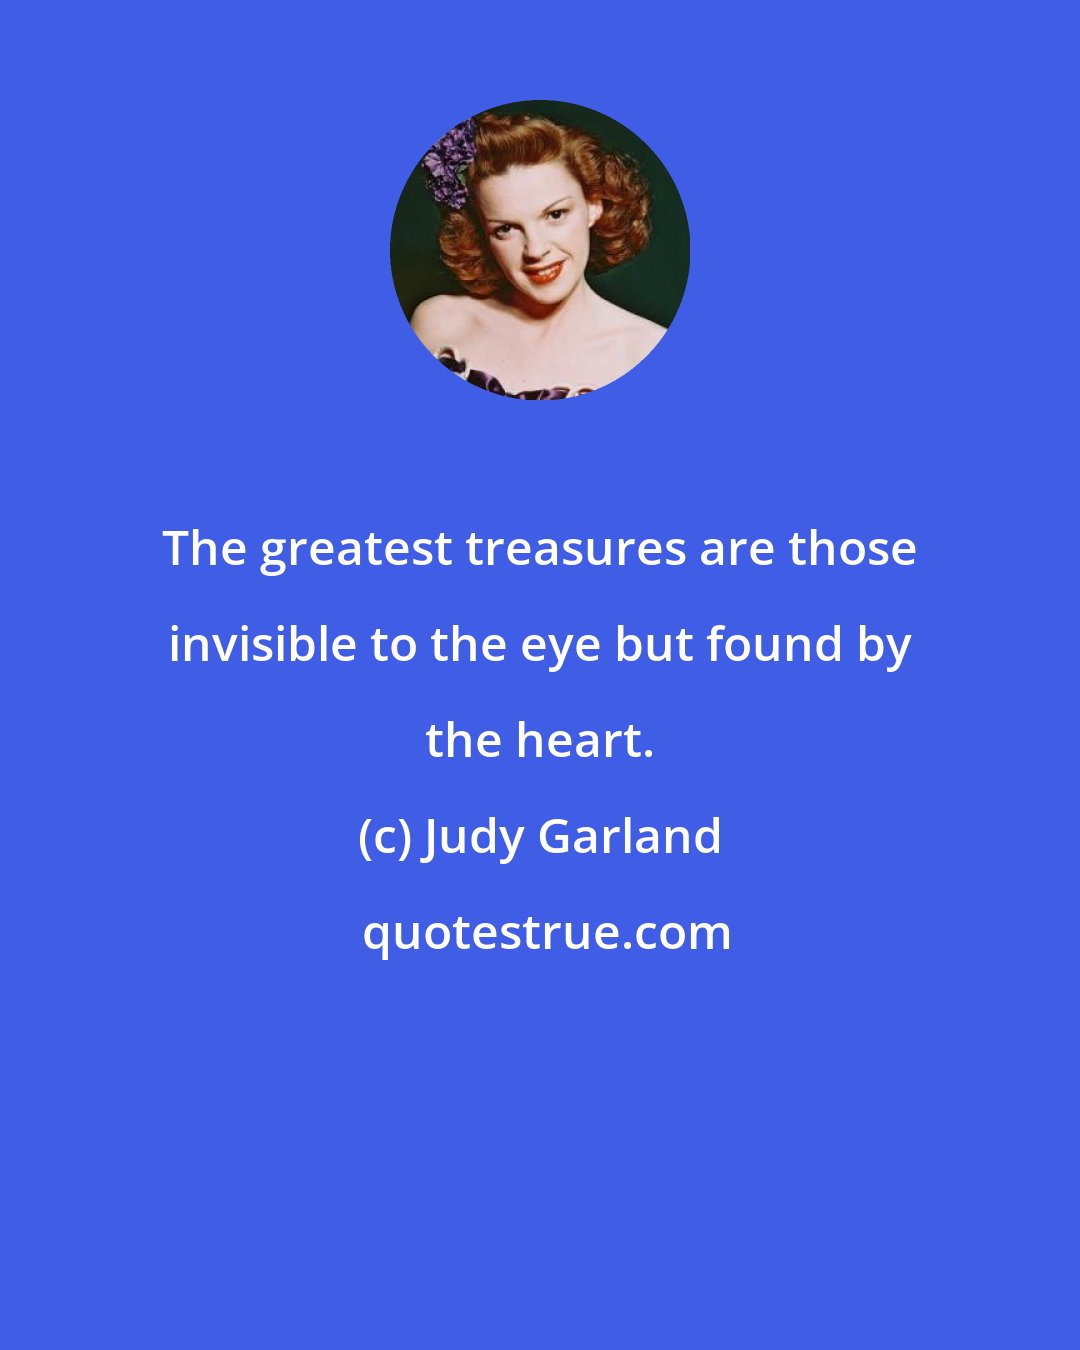 Judy Garland: The greatest treasures are those invisible to the eye but found by the heart.